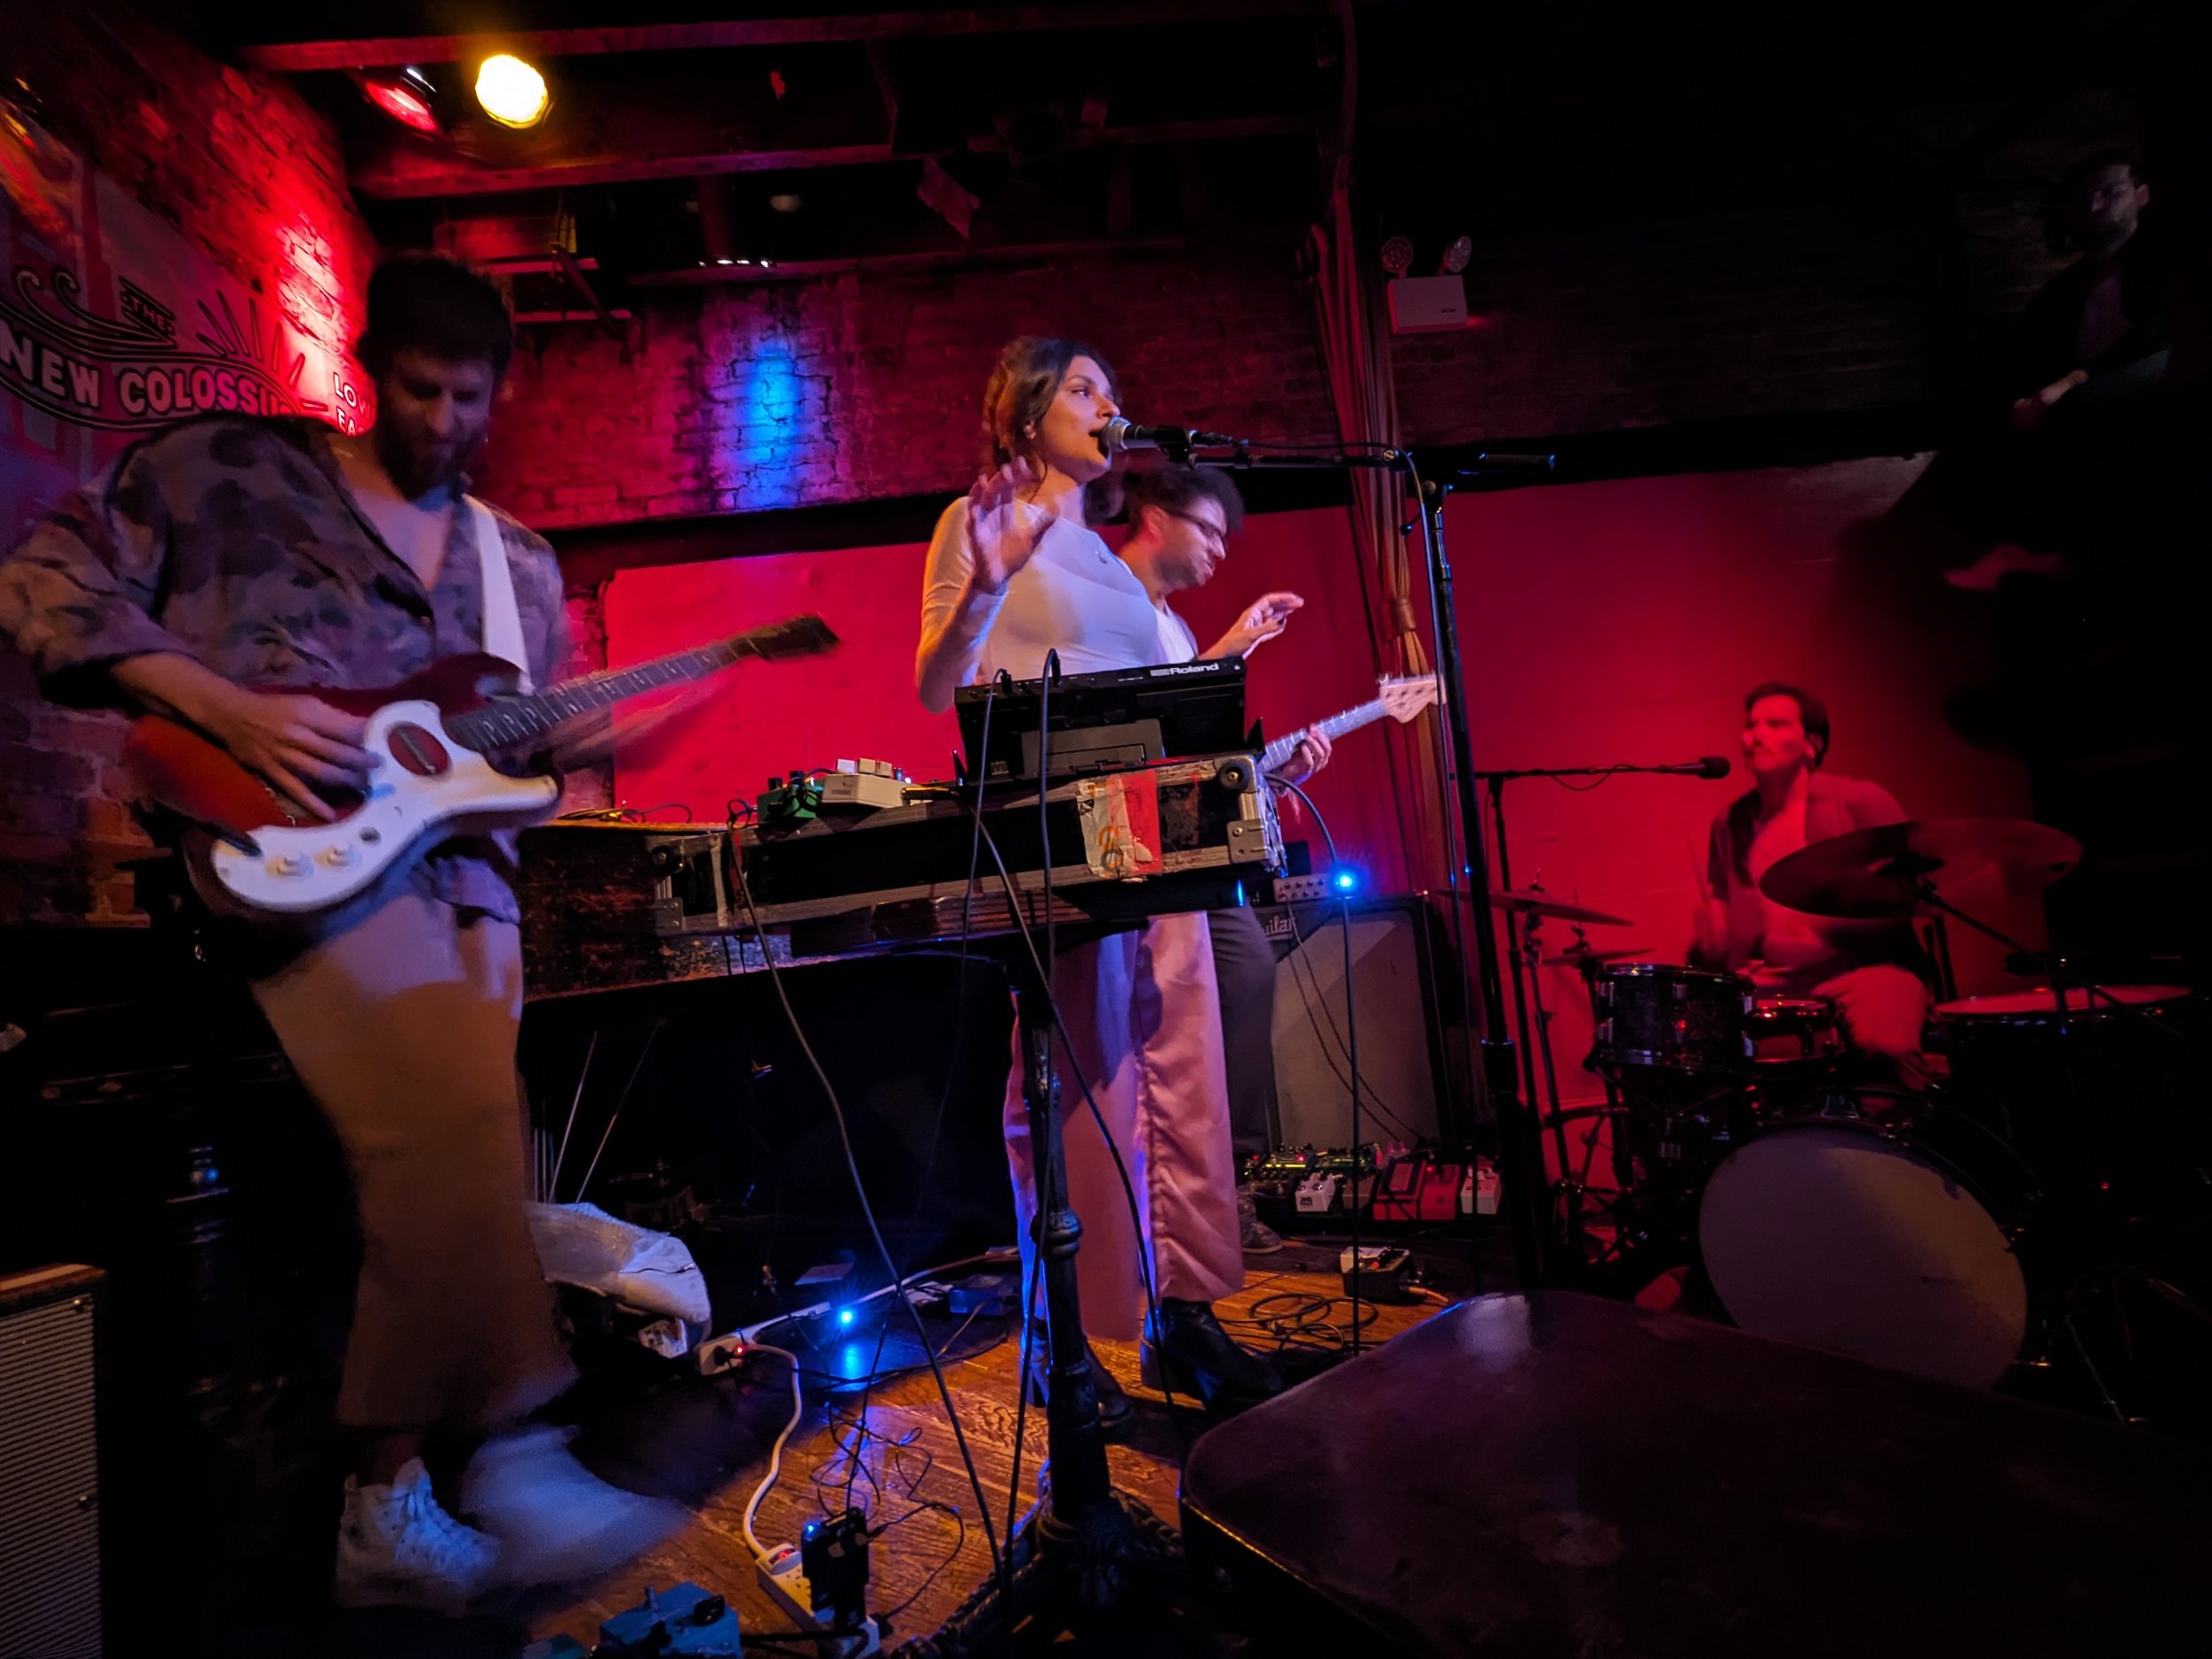 240307-live-review-fest-new-colossus-rockwood-pap.jpg